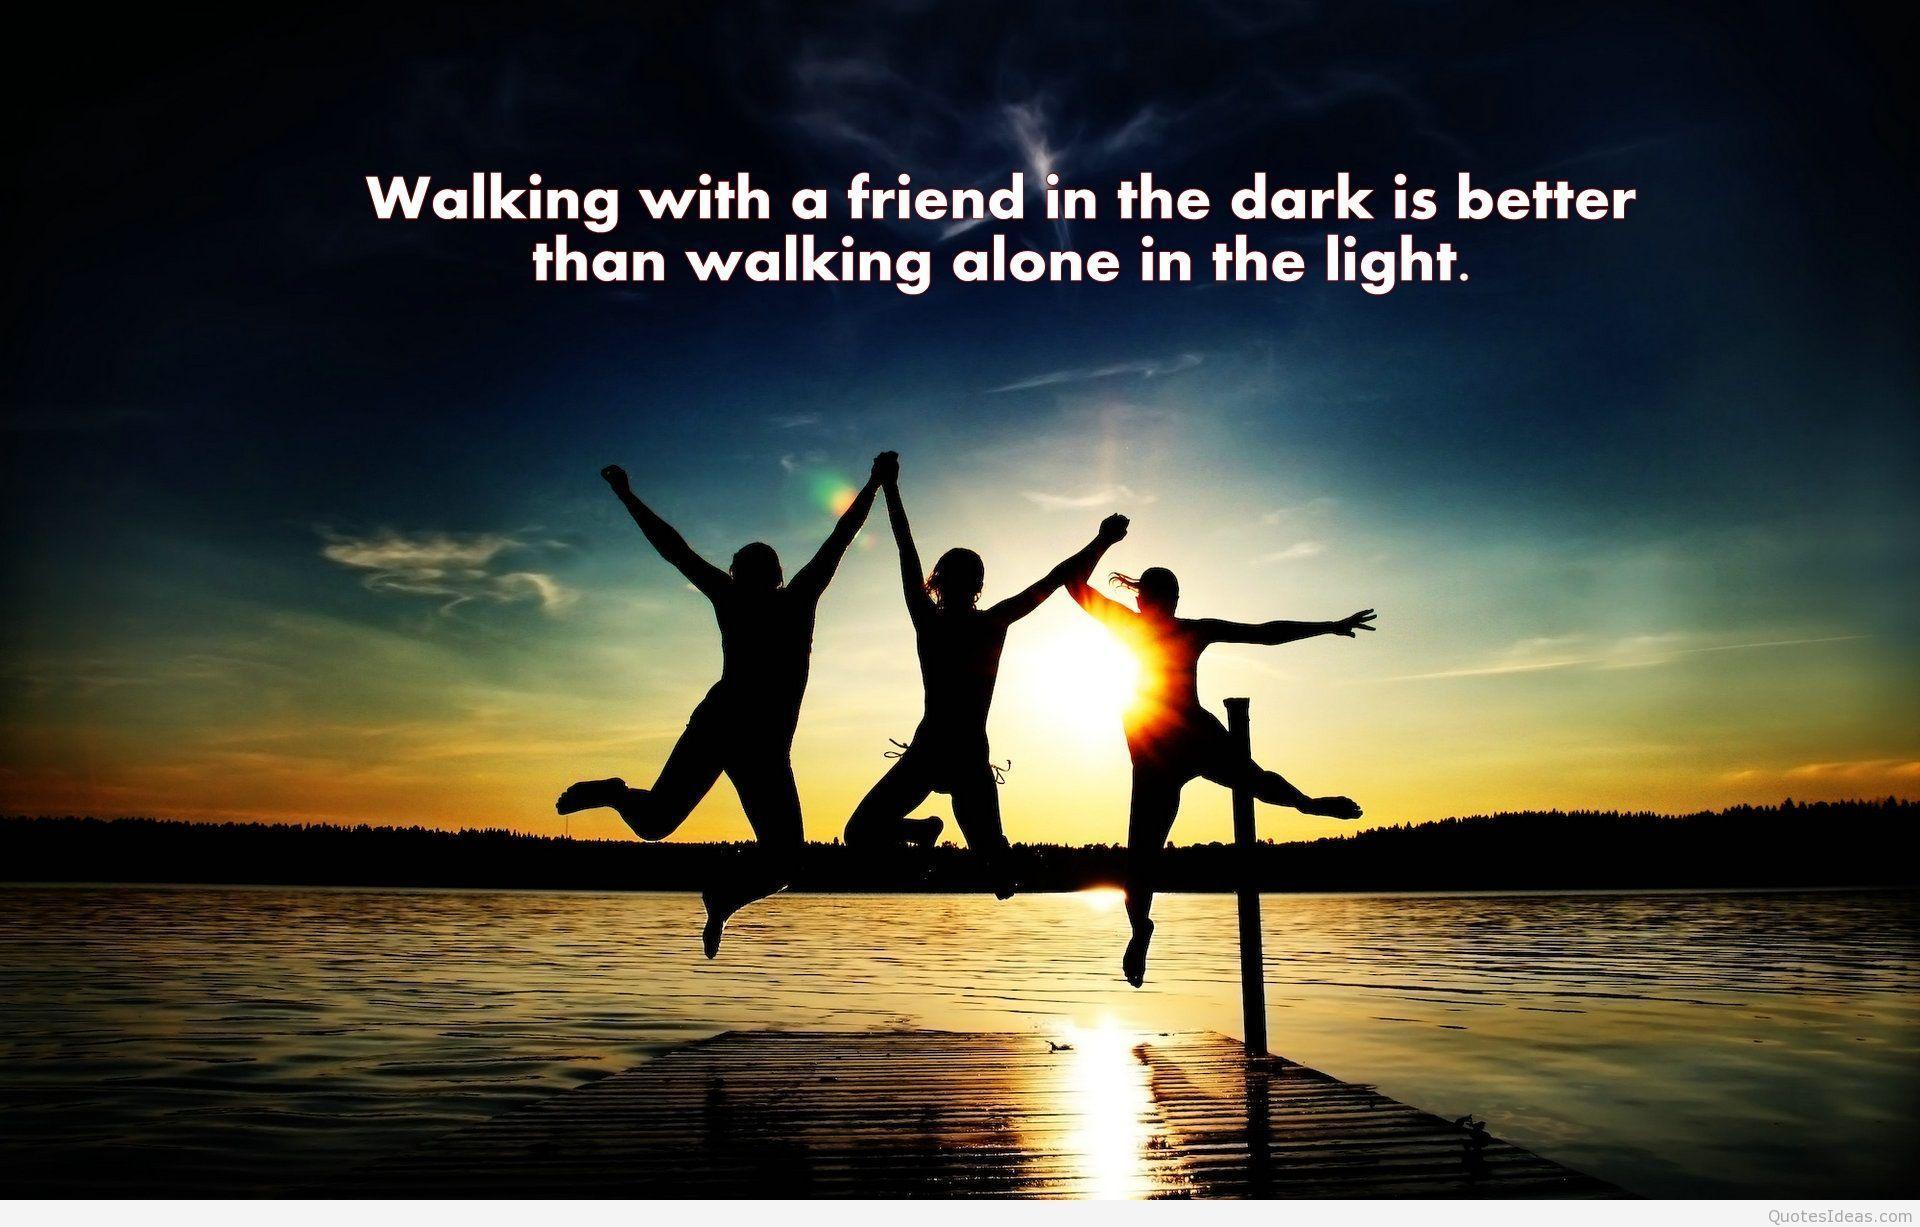 20 Creative Friendship Day Quotes and Wallpapers 20191